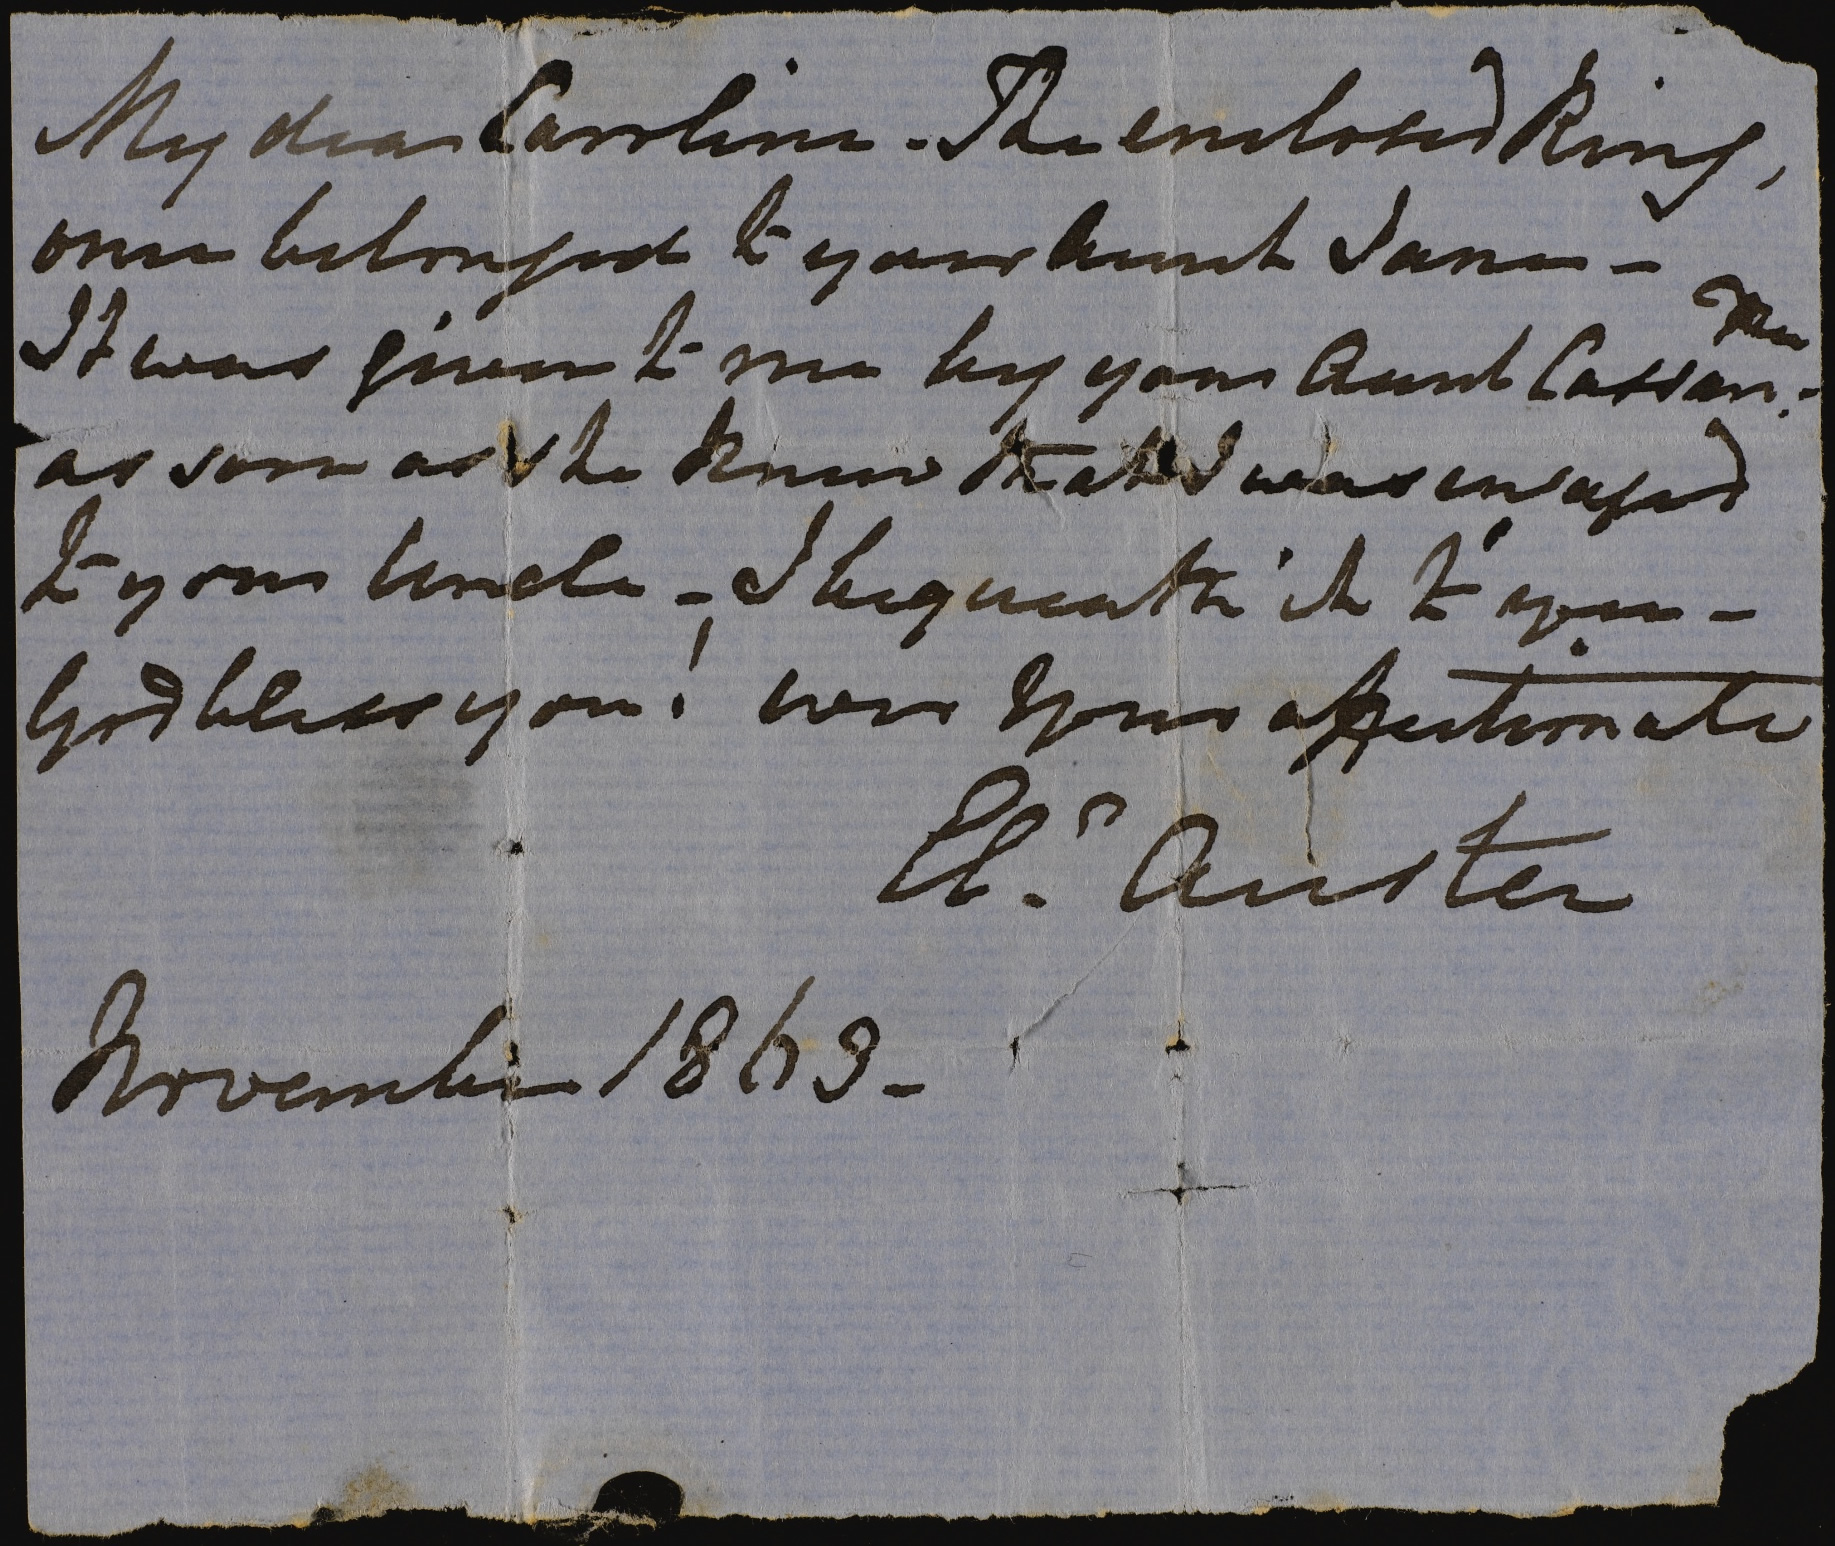  - Note-from-Eleanor-Austen-wife-of-Henry-SIL-of-Jane